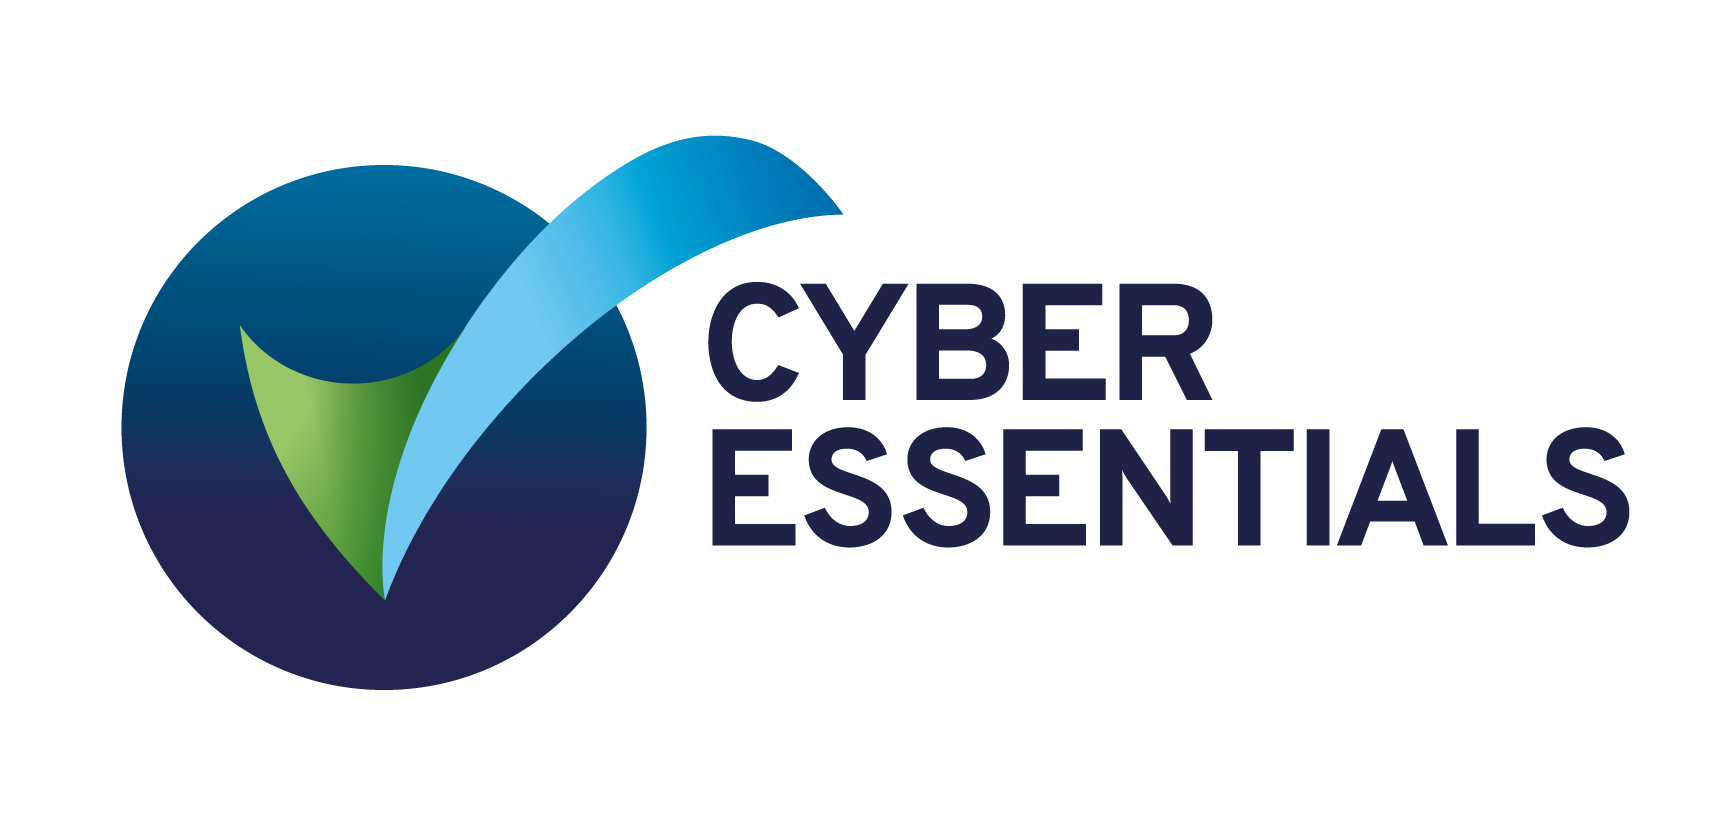 What is Cyber Essentials?